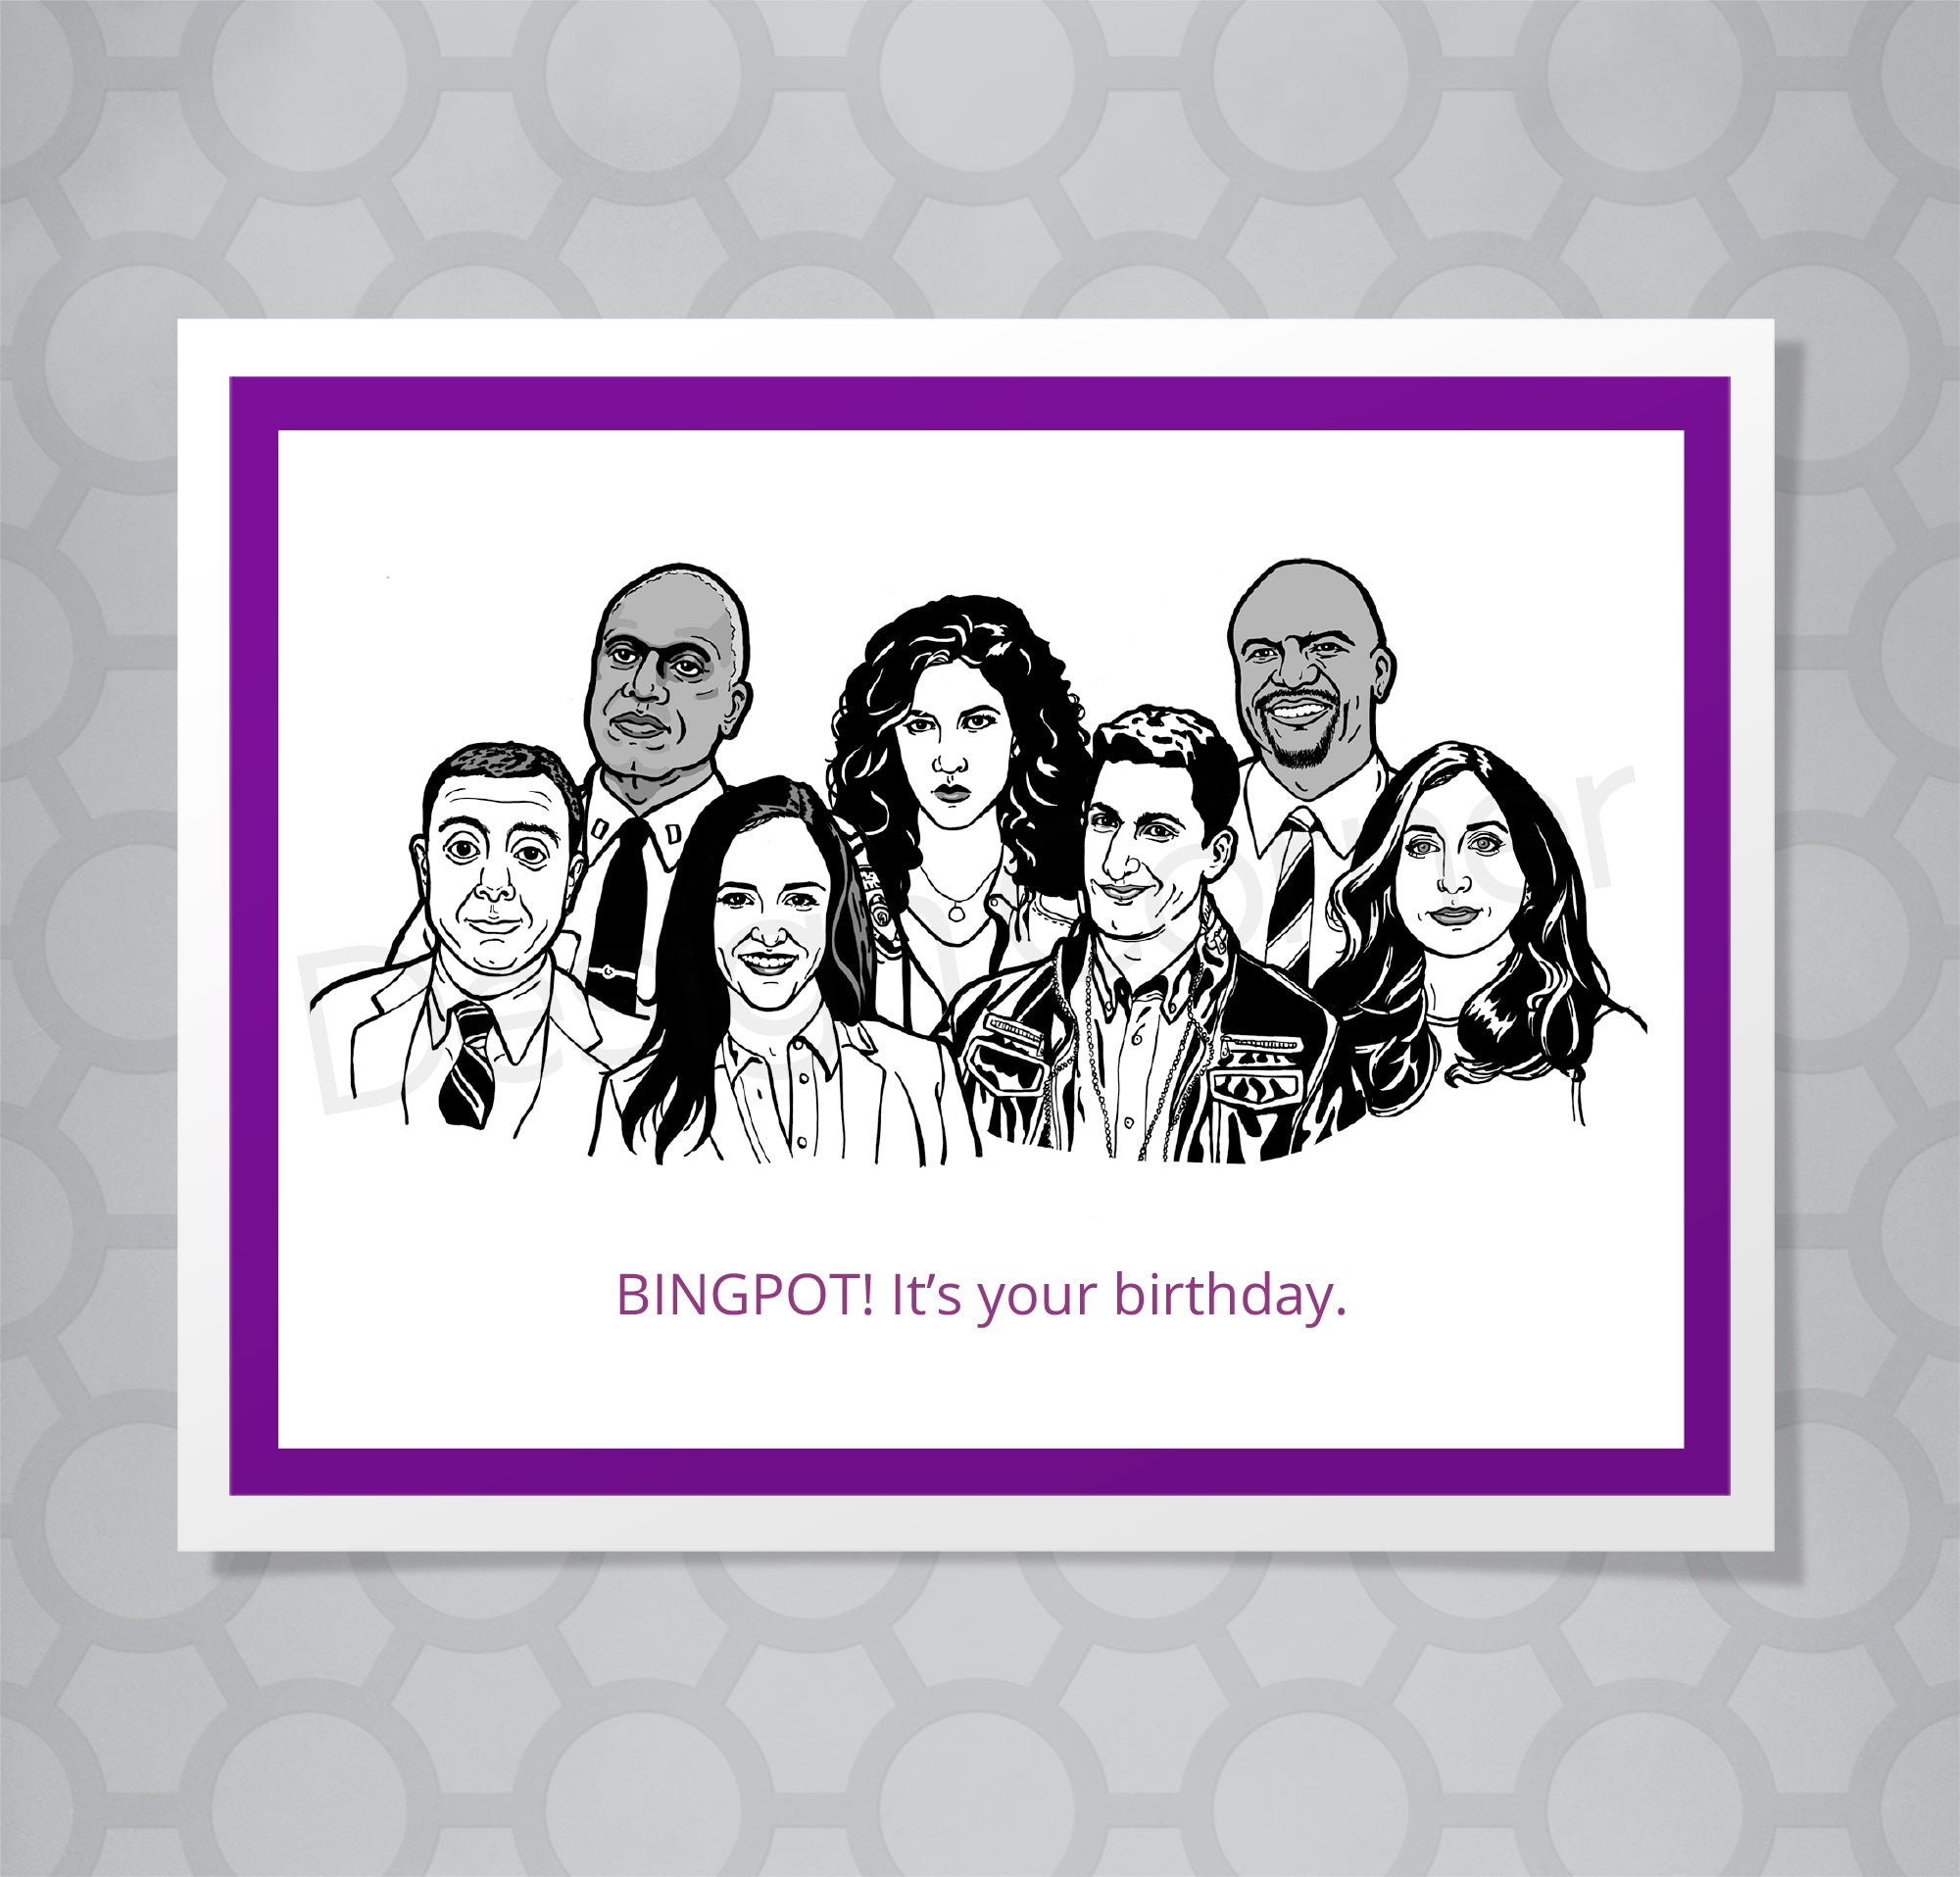 Greeting card with illustrations of Brooklyn Nine Nine cast. Caption says Bingpot! It's your birthday.